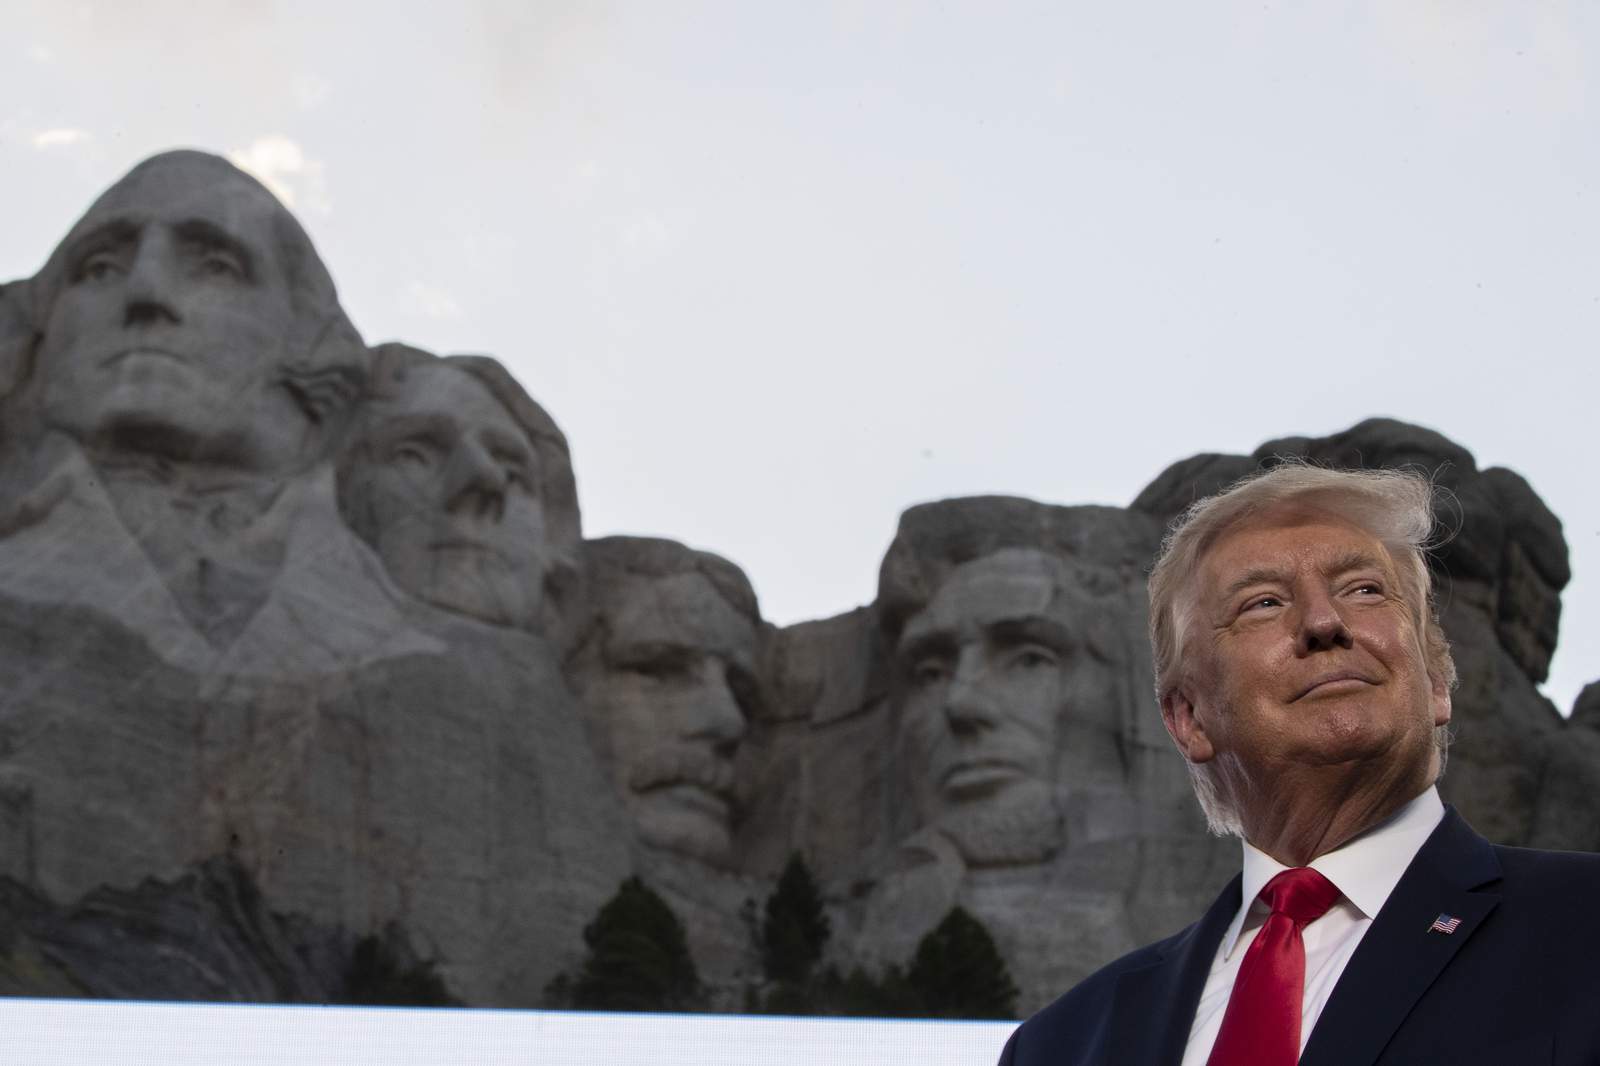 NYT: President Trump aides ask about adding him to Mount Rushmore